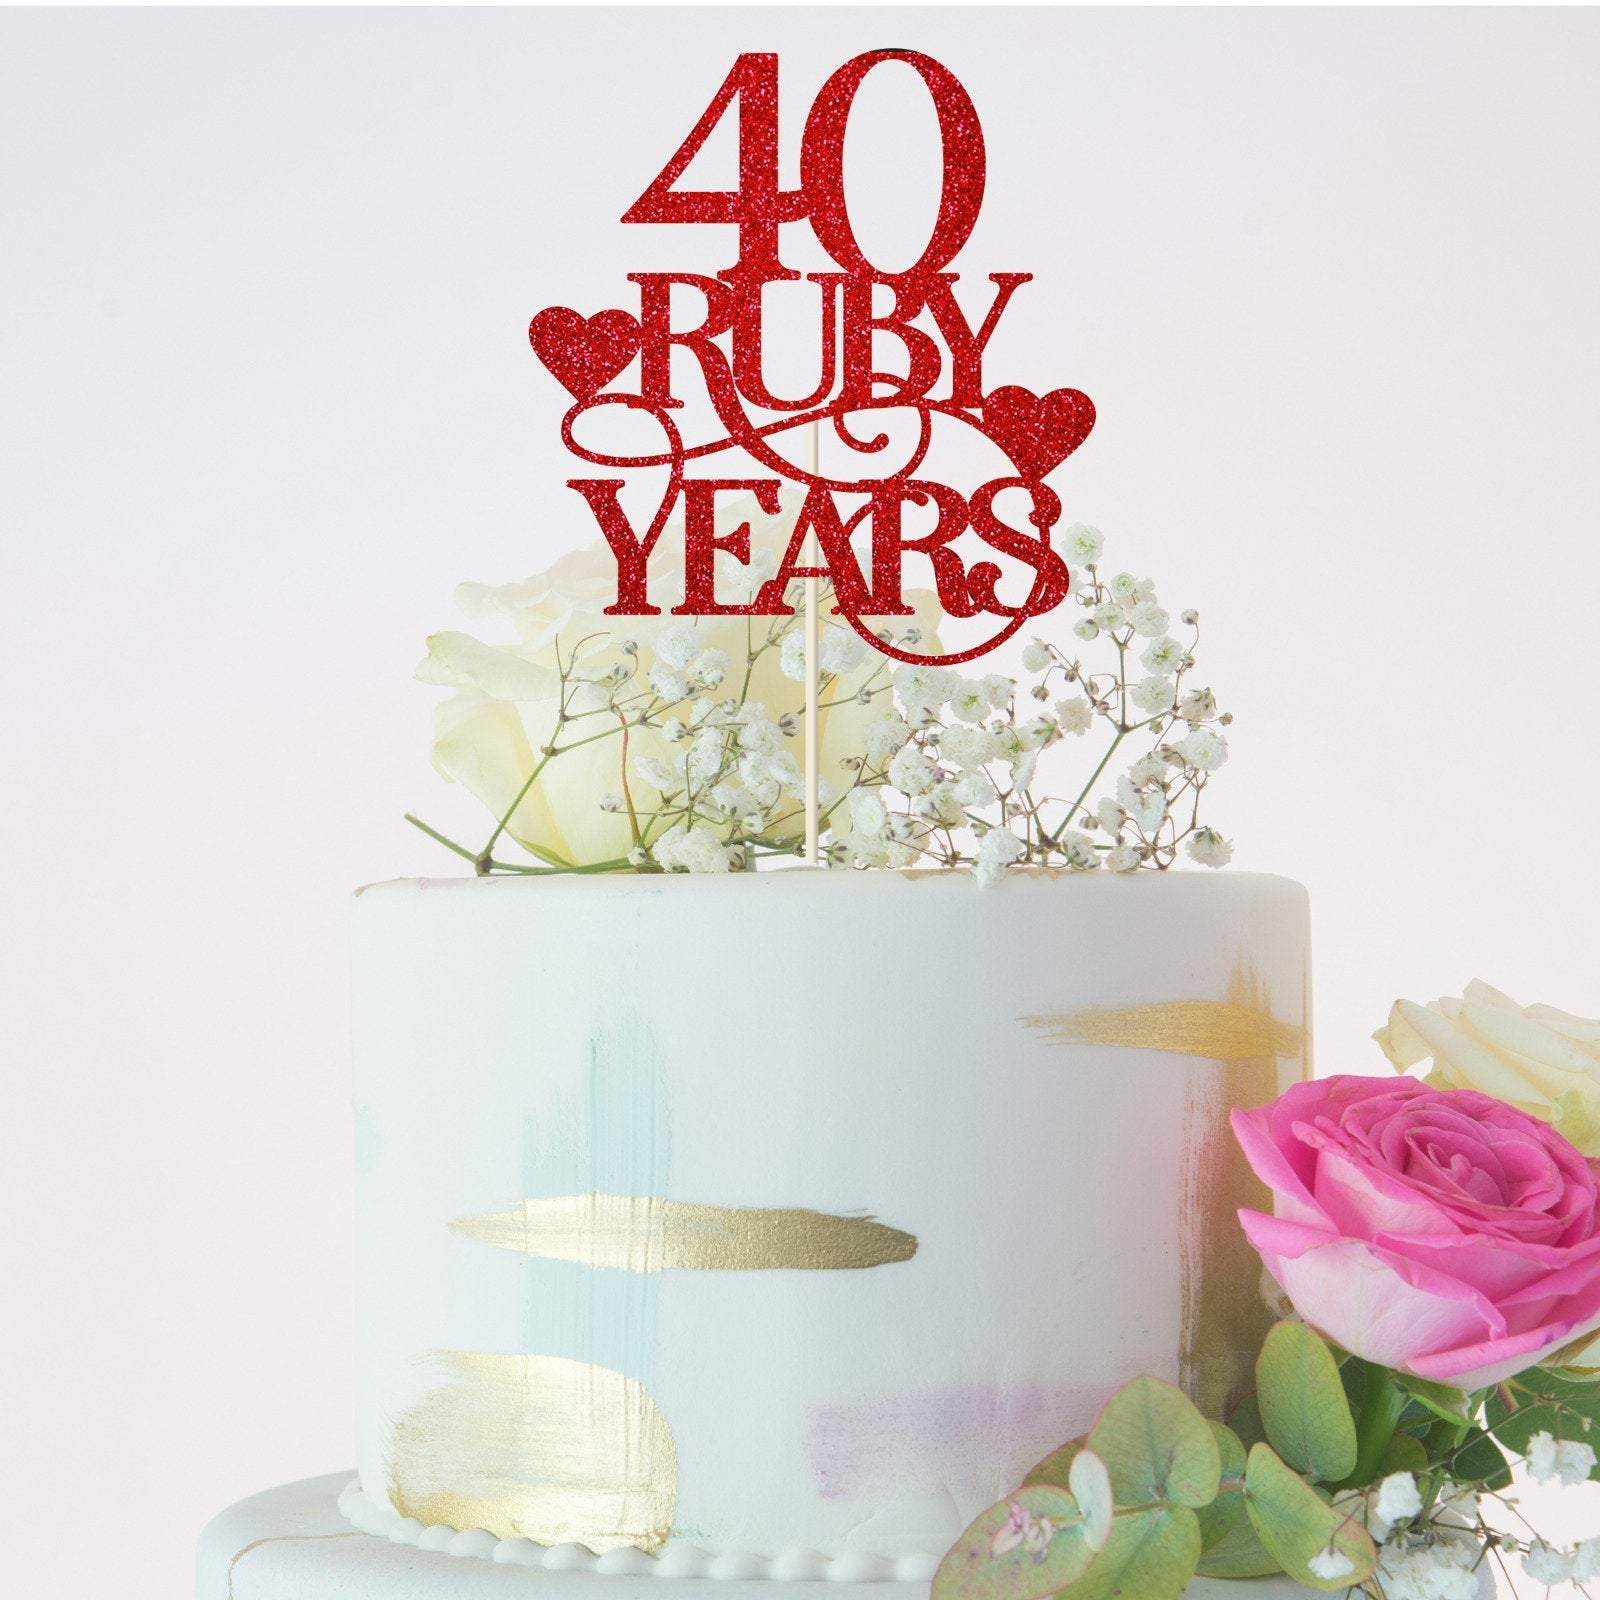 40 Ruby years cake topper, Wedding anniversary red glitter party decor Ruby years anniversary